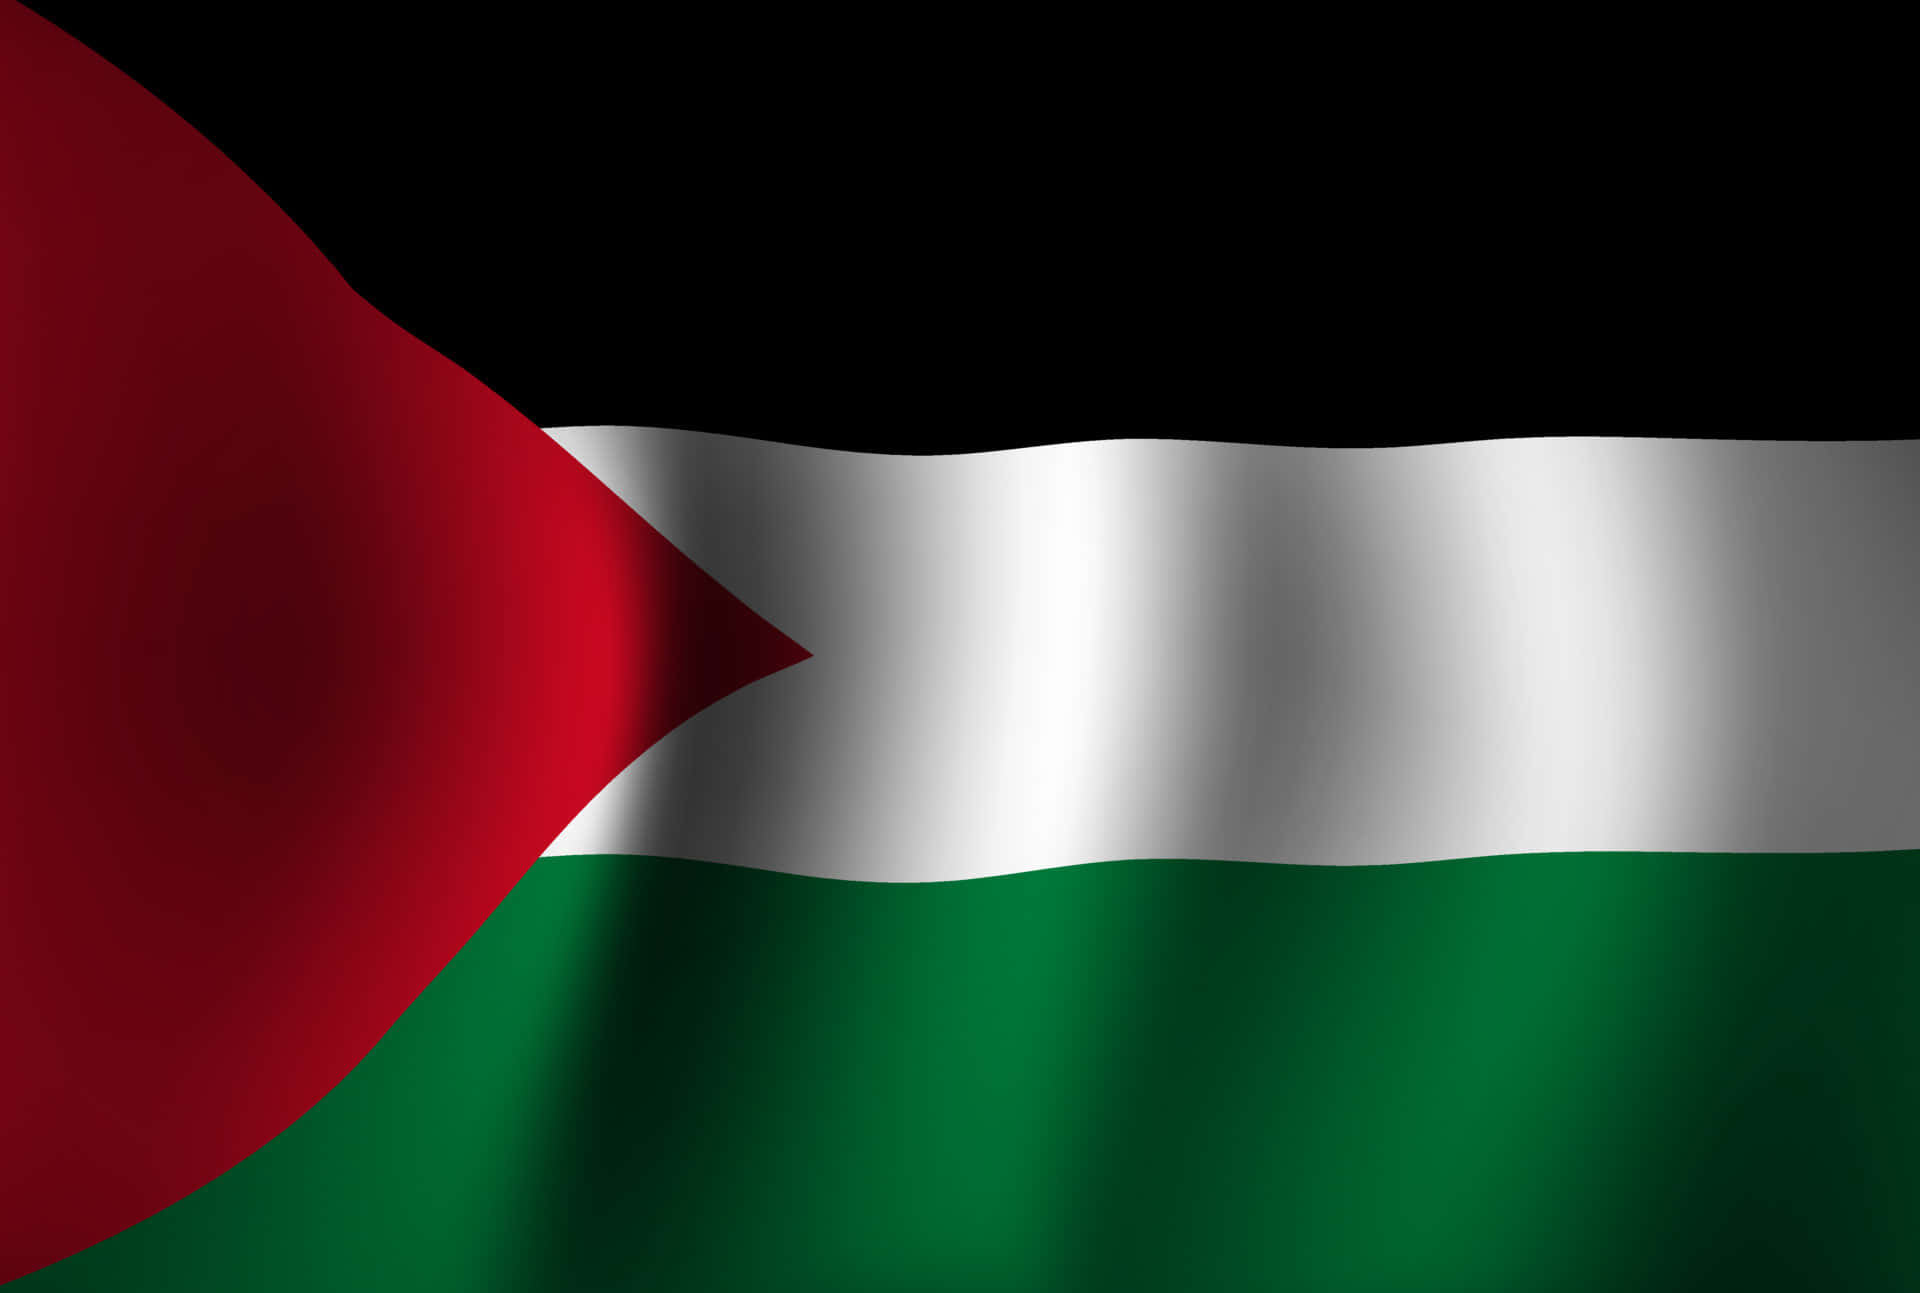 The Flag Of Palestine Is Waving In The Wind